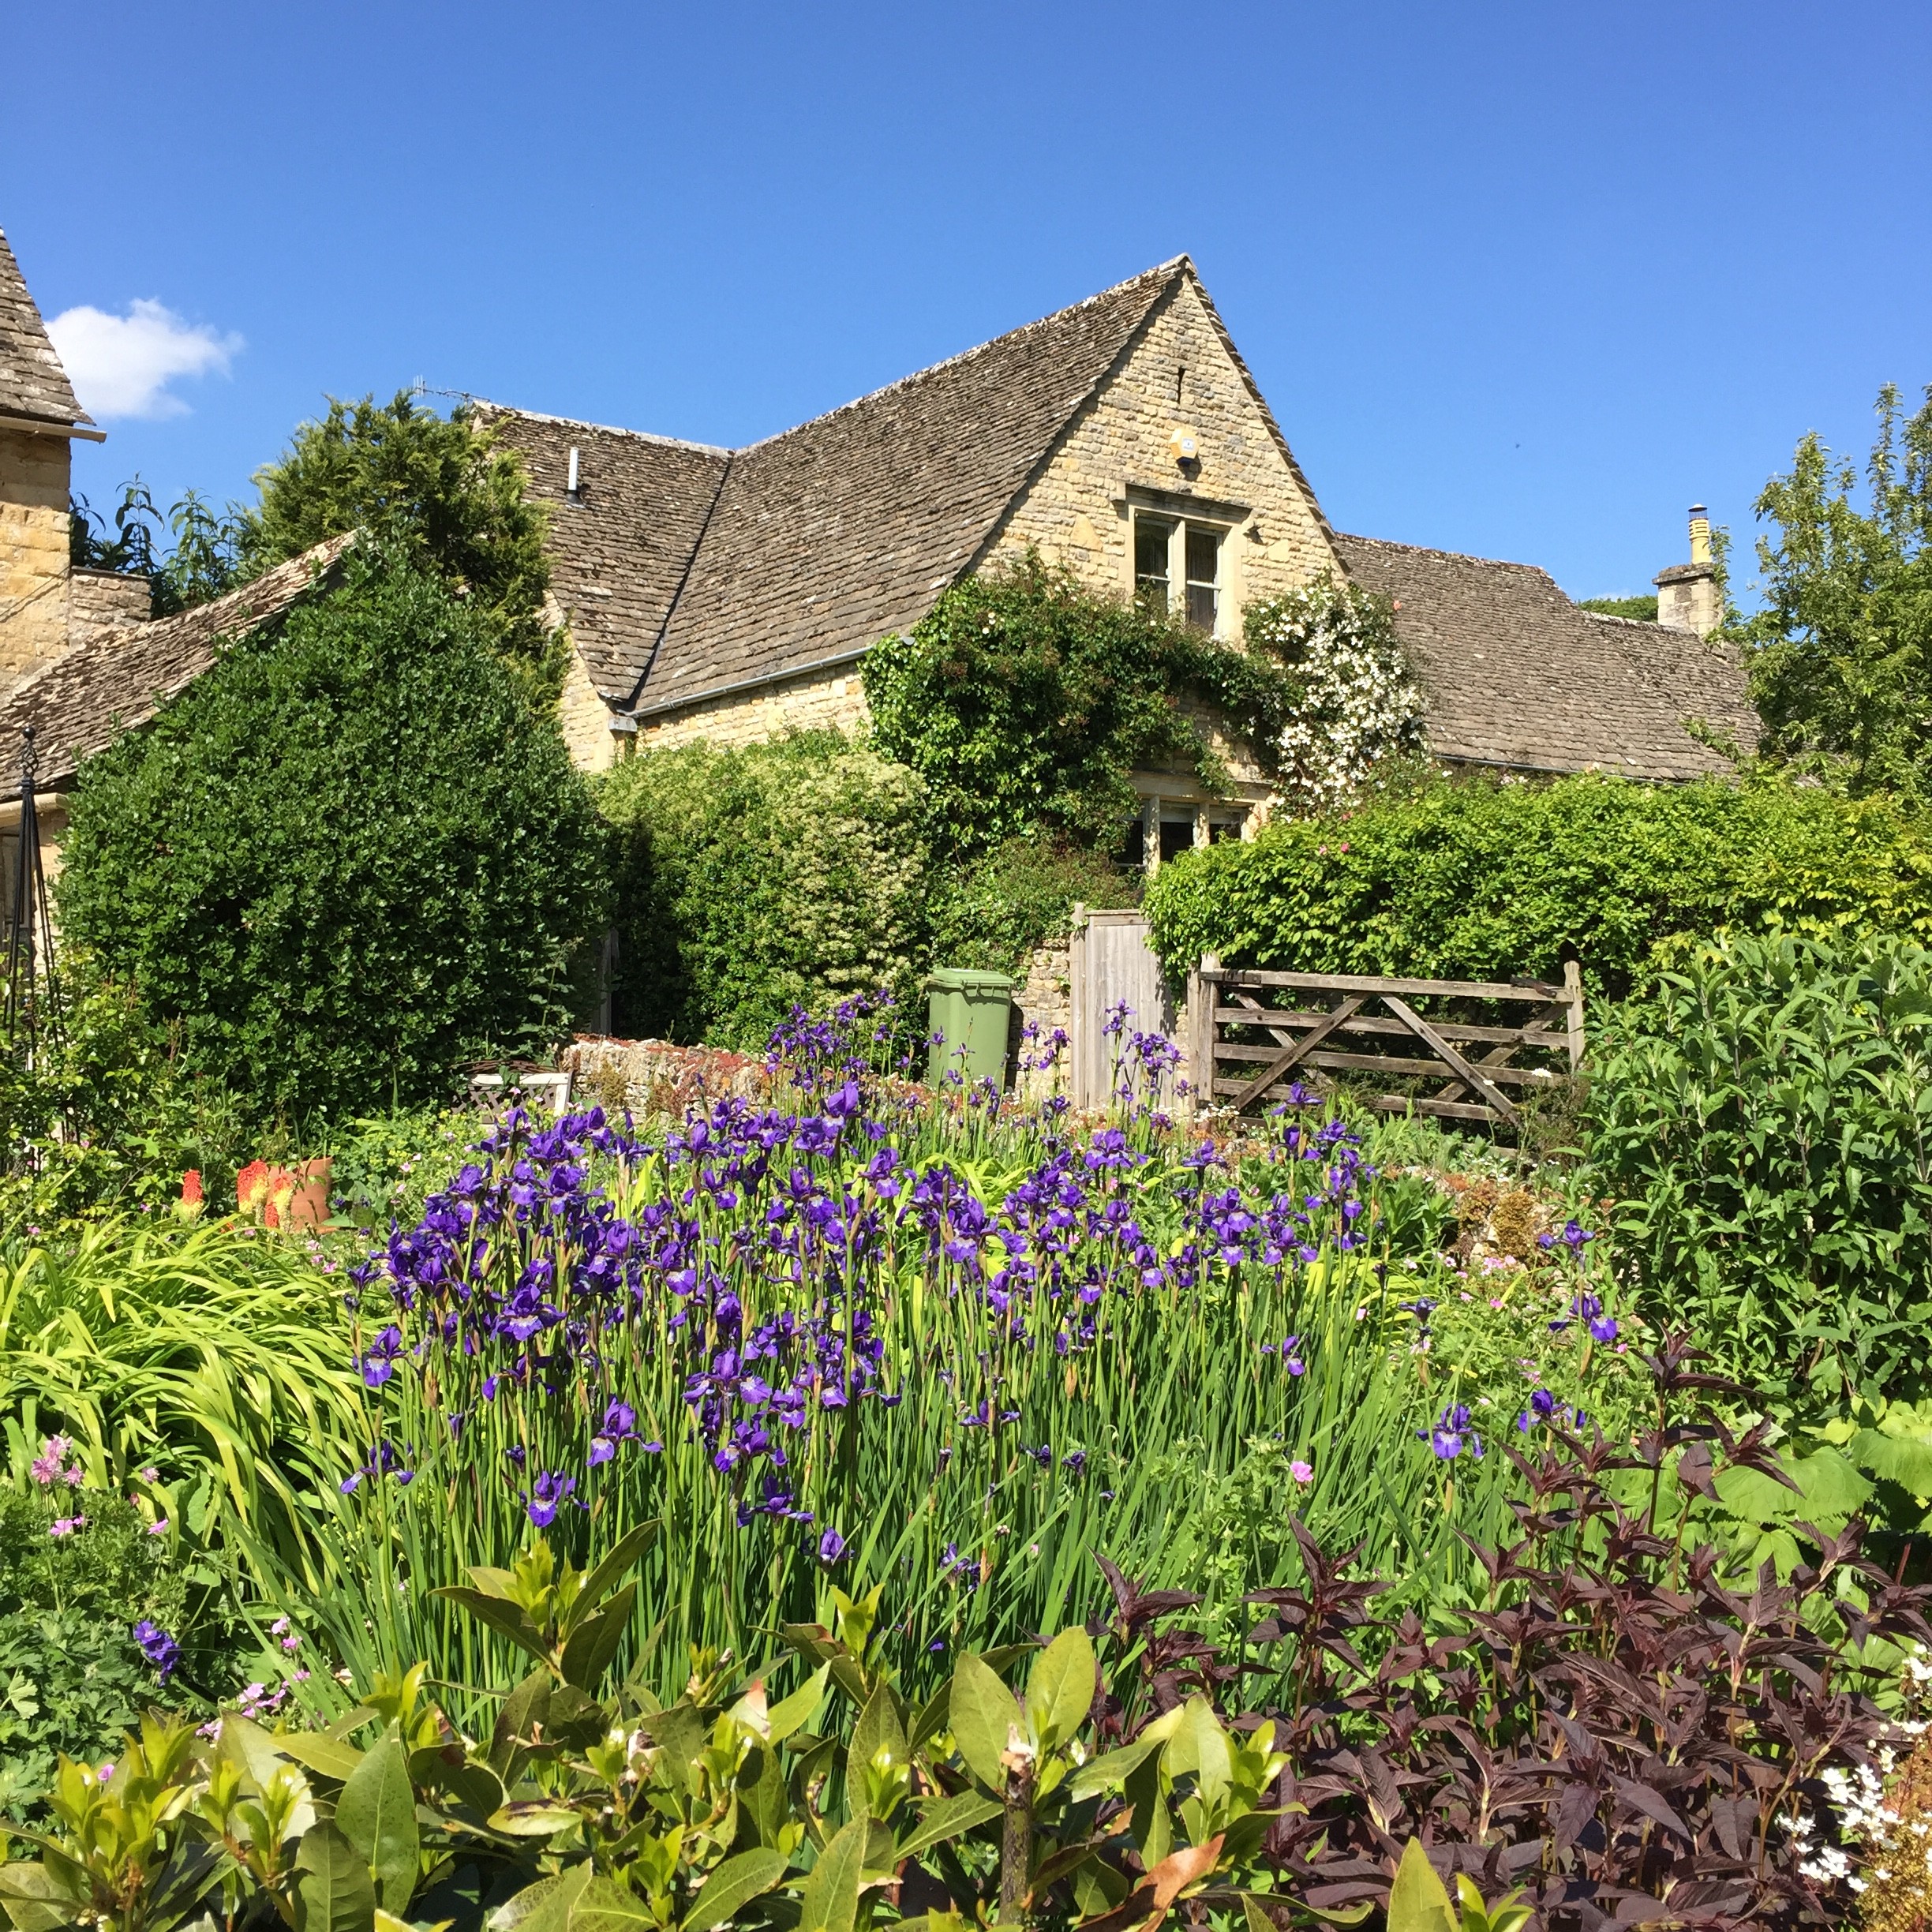 Quirky and Quaint : A Summer Day in the Cotswold